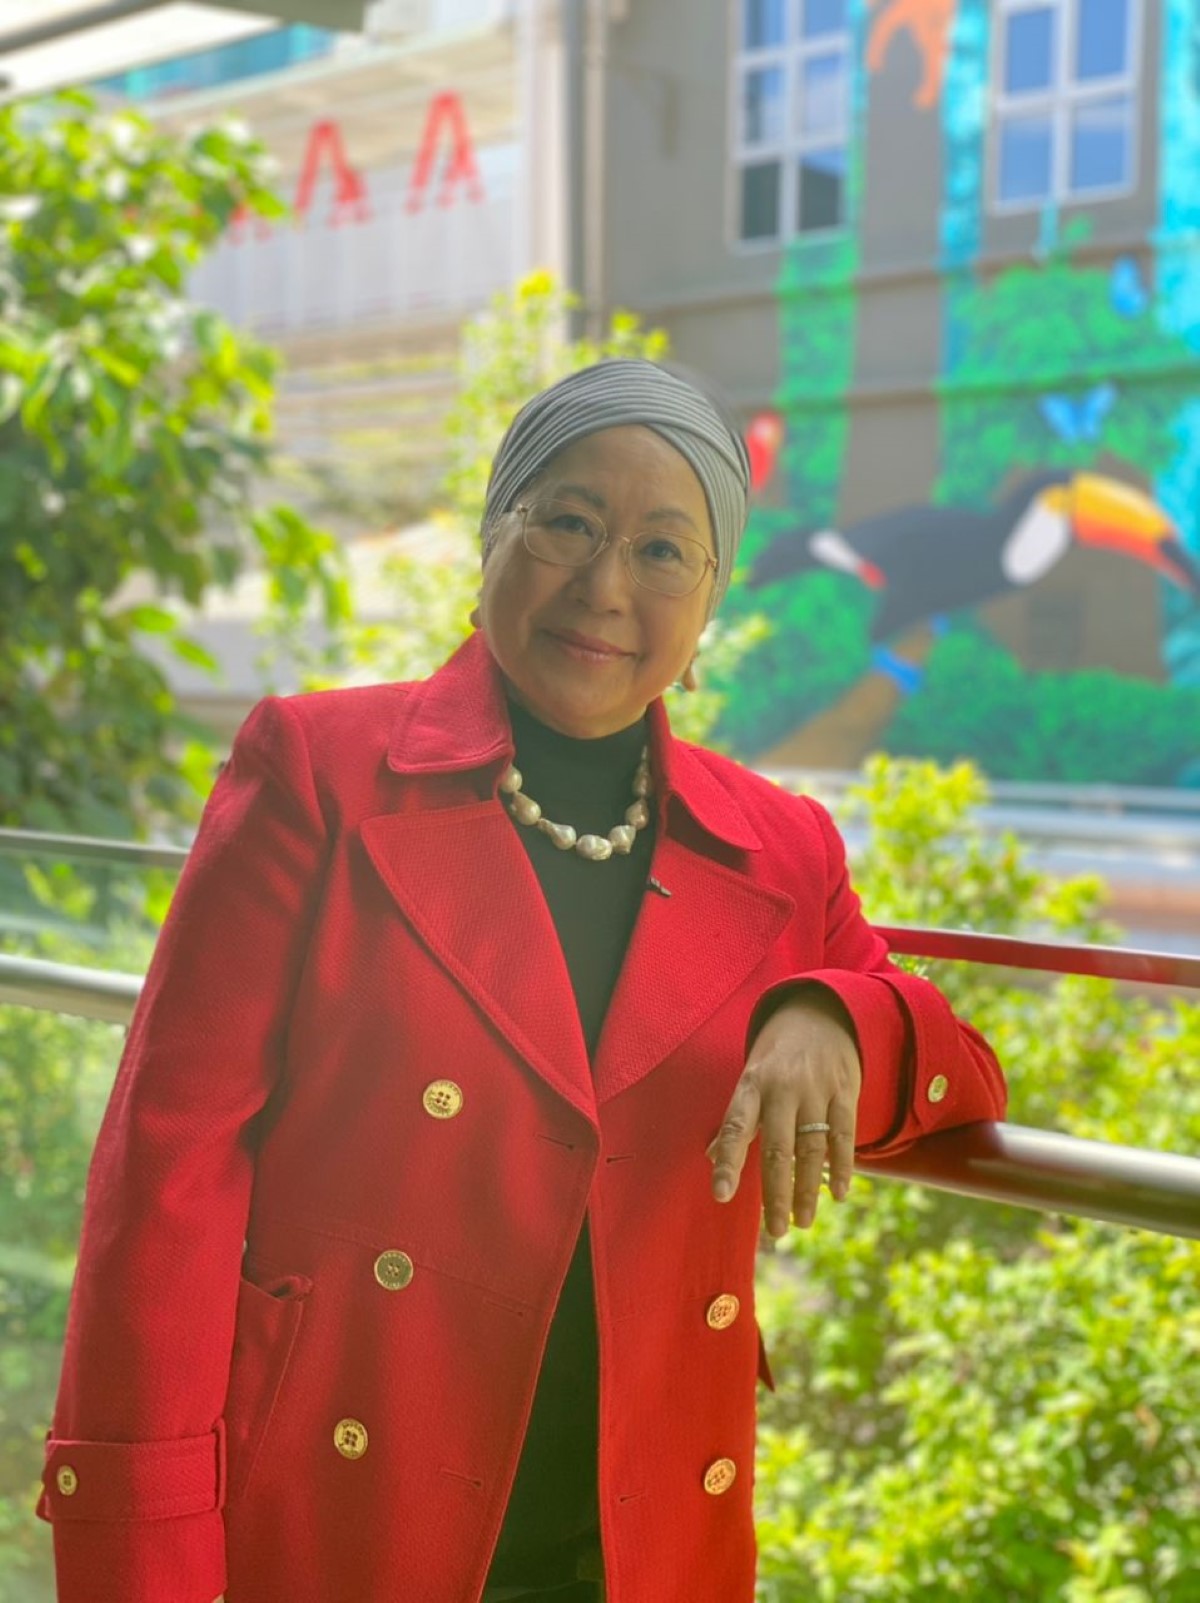 A mid-wide shot of Tan Sri Dr. Jemilah Mahmood who leads Sunway Centre for Planetary Health (SCPH), dressed in a striking red coat with gold buttons, string of mother of peals and a grey turban head scarf, with one elbow propped up on the metal railings, surrounded by lush greeneries and a mural with a toucan on it.